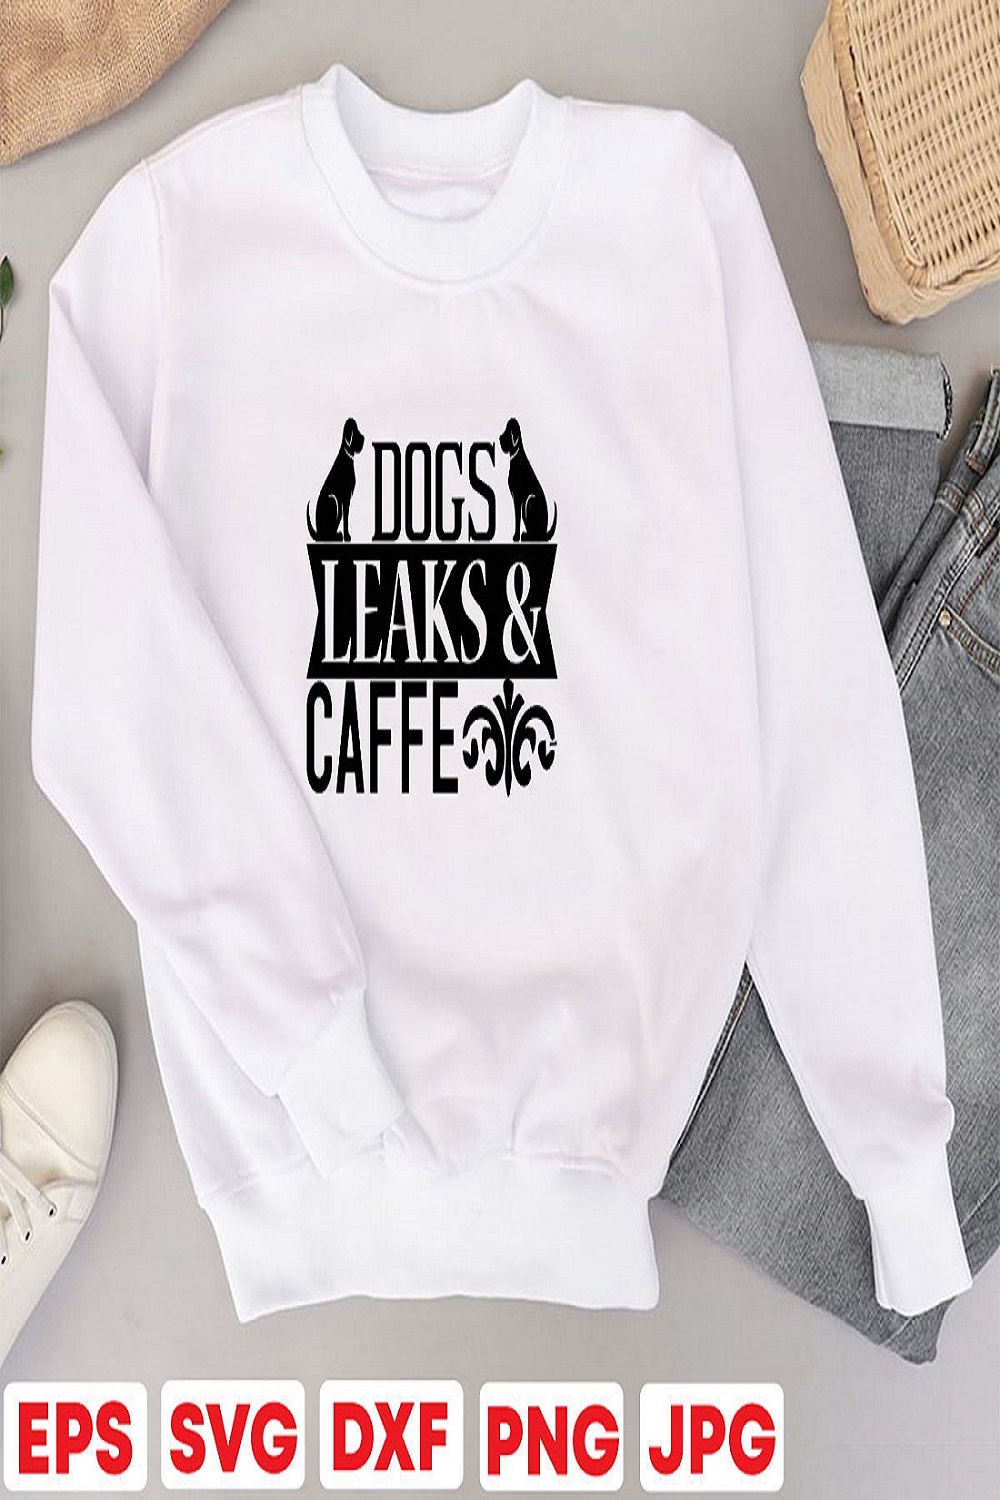 Dogs leaks and Caffe pinterest preview image.